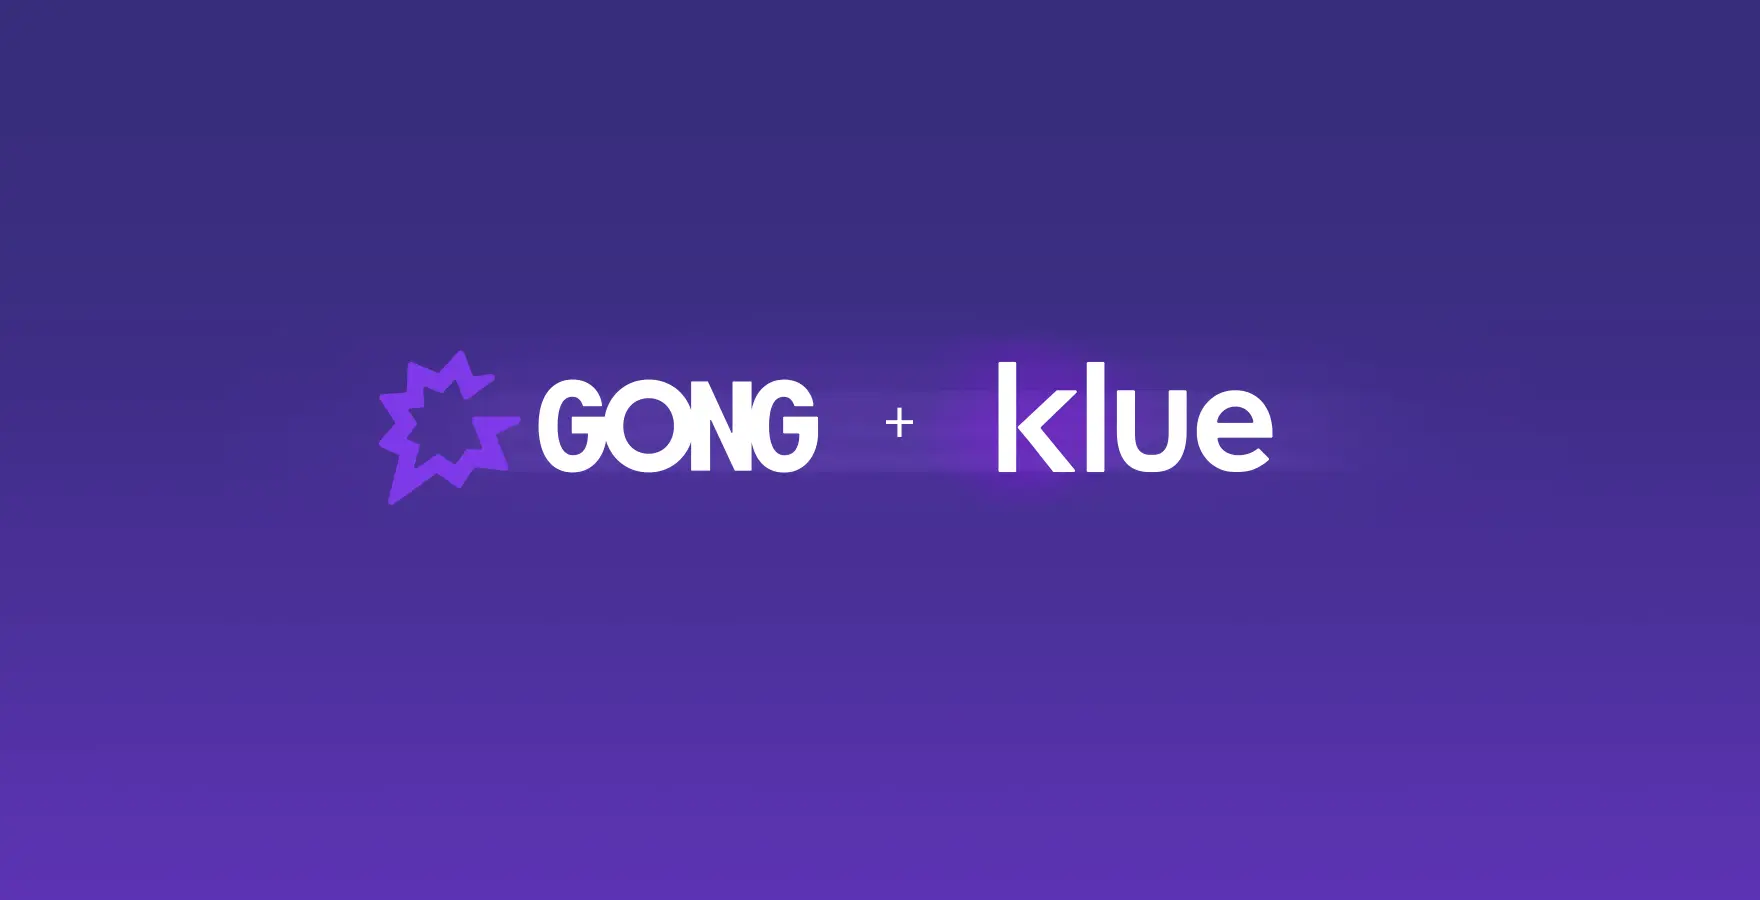 Klue-_-Gong-playbook